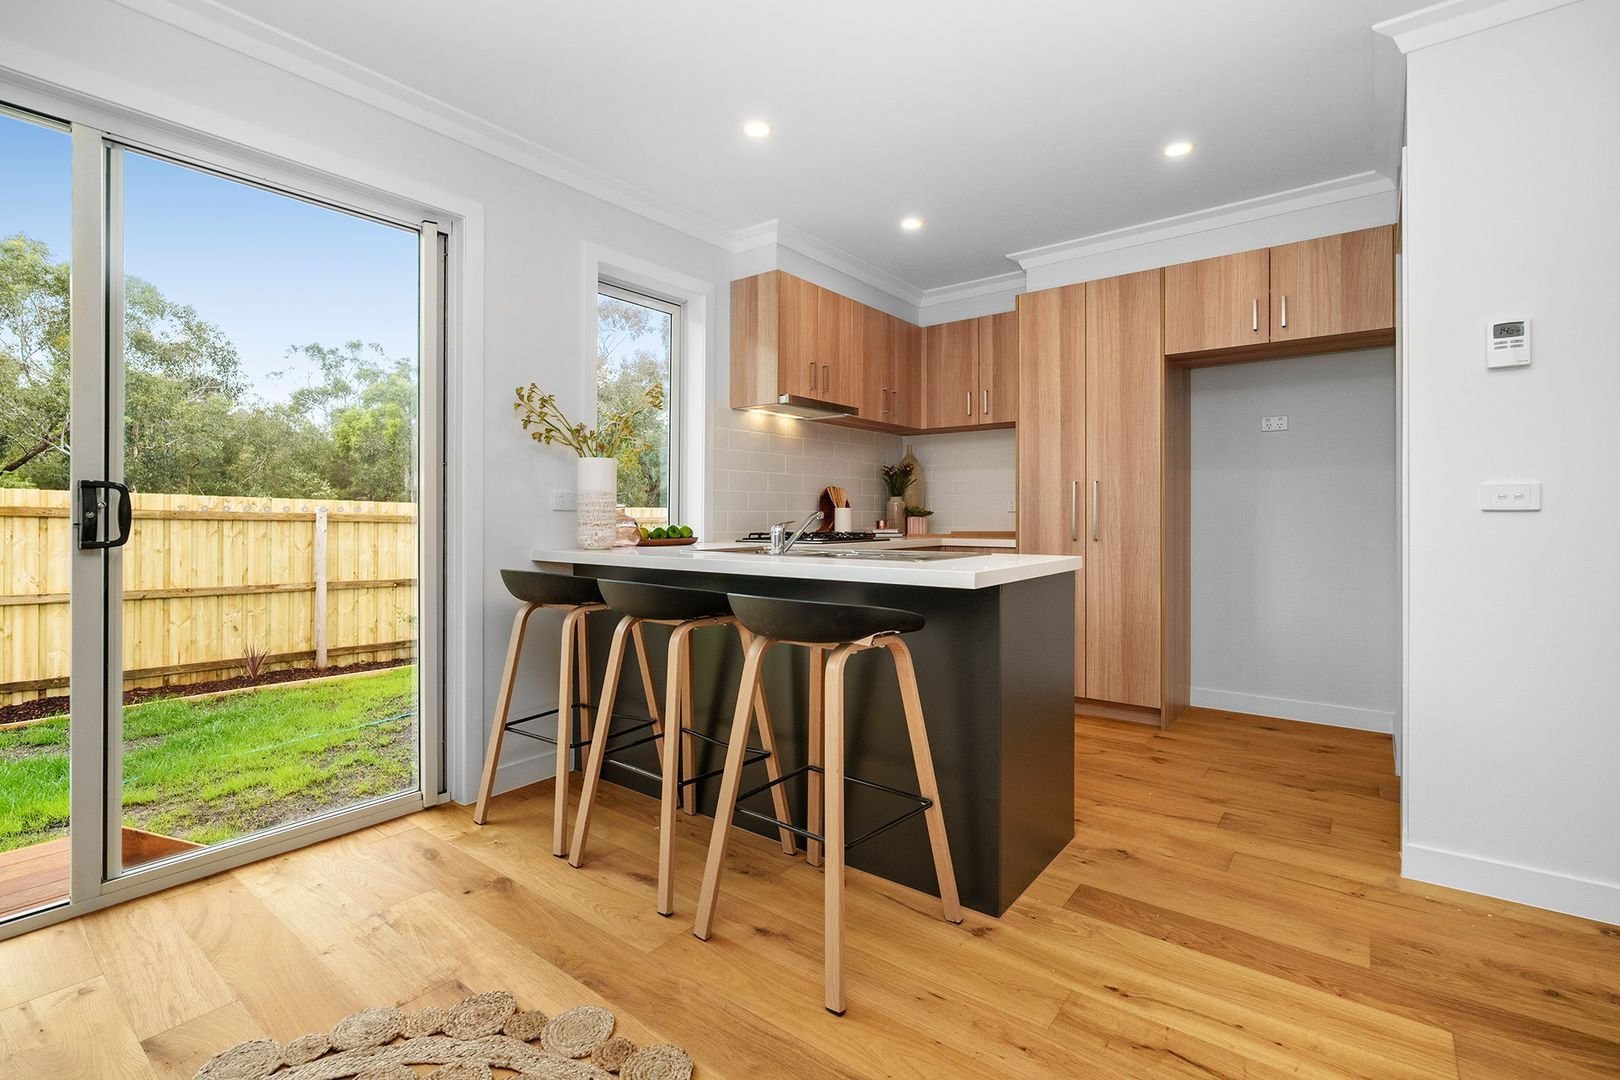 Croydon - Vinter Avenue - 52-62 Vinter Avenue, Croydon, VIC 3136 - Townly - 9.jpg